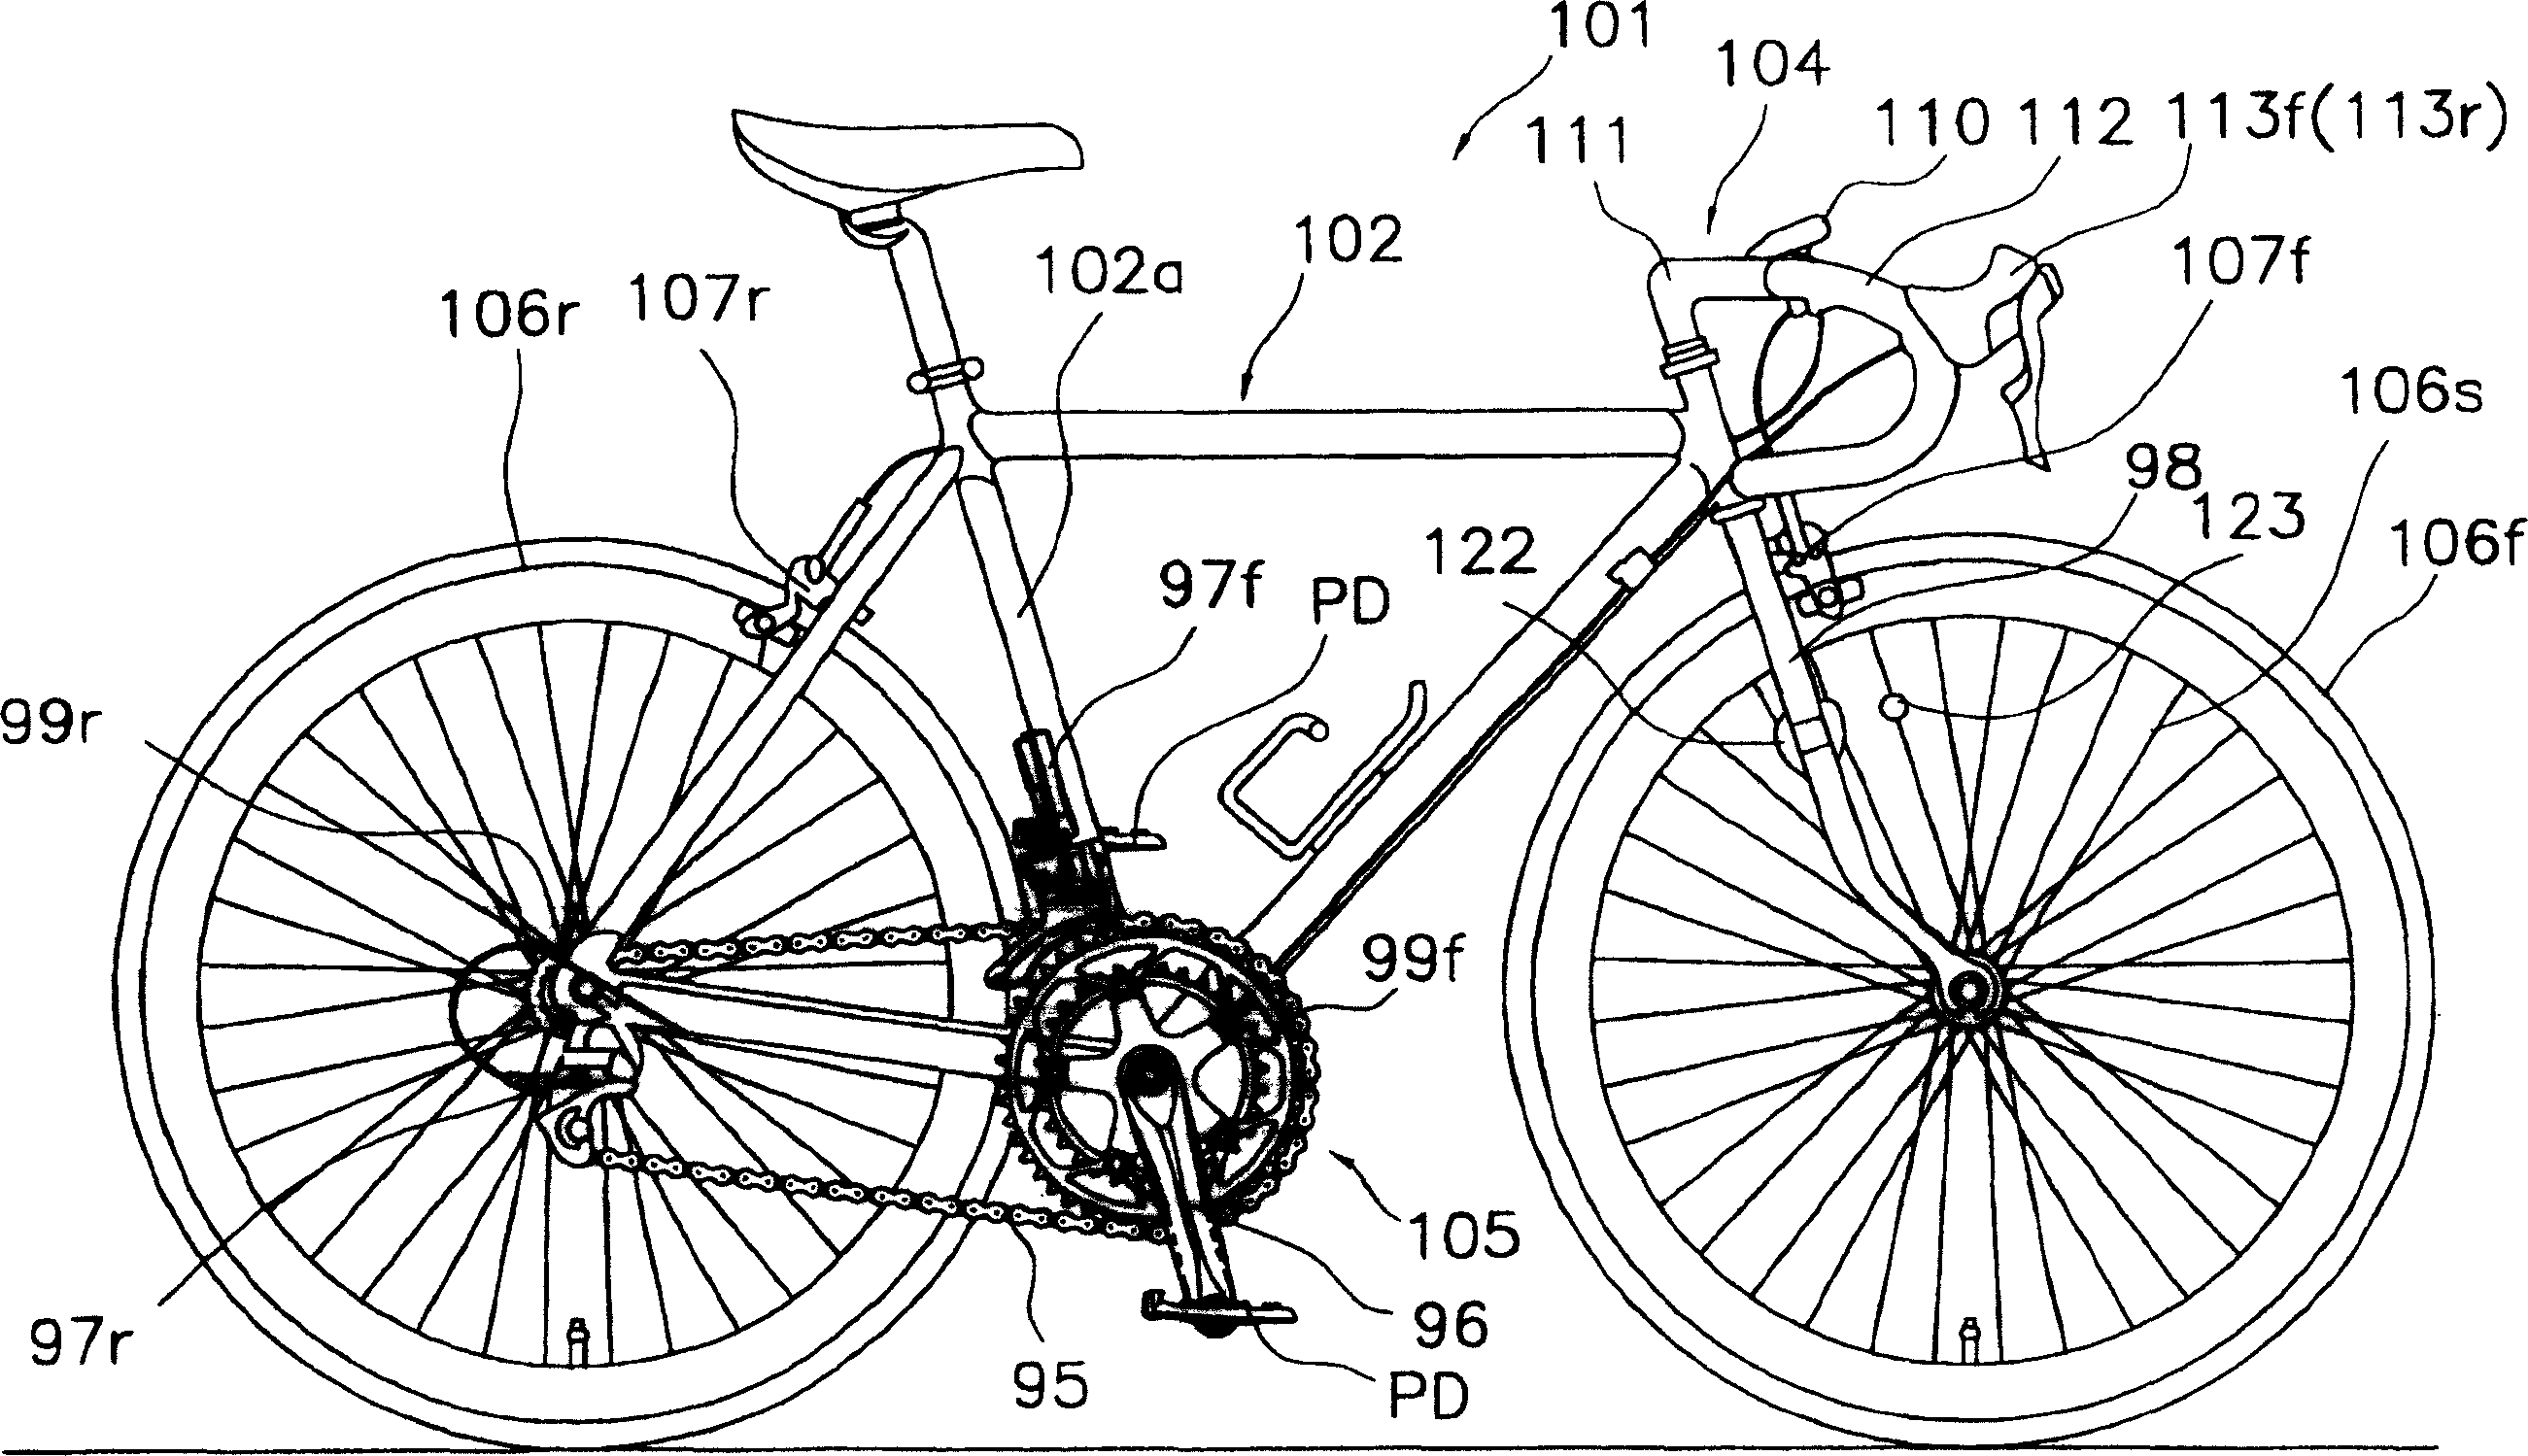 Bicycle derailleur control device and method for controlling a front derailleur